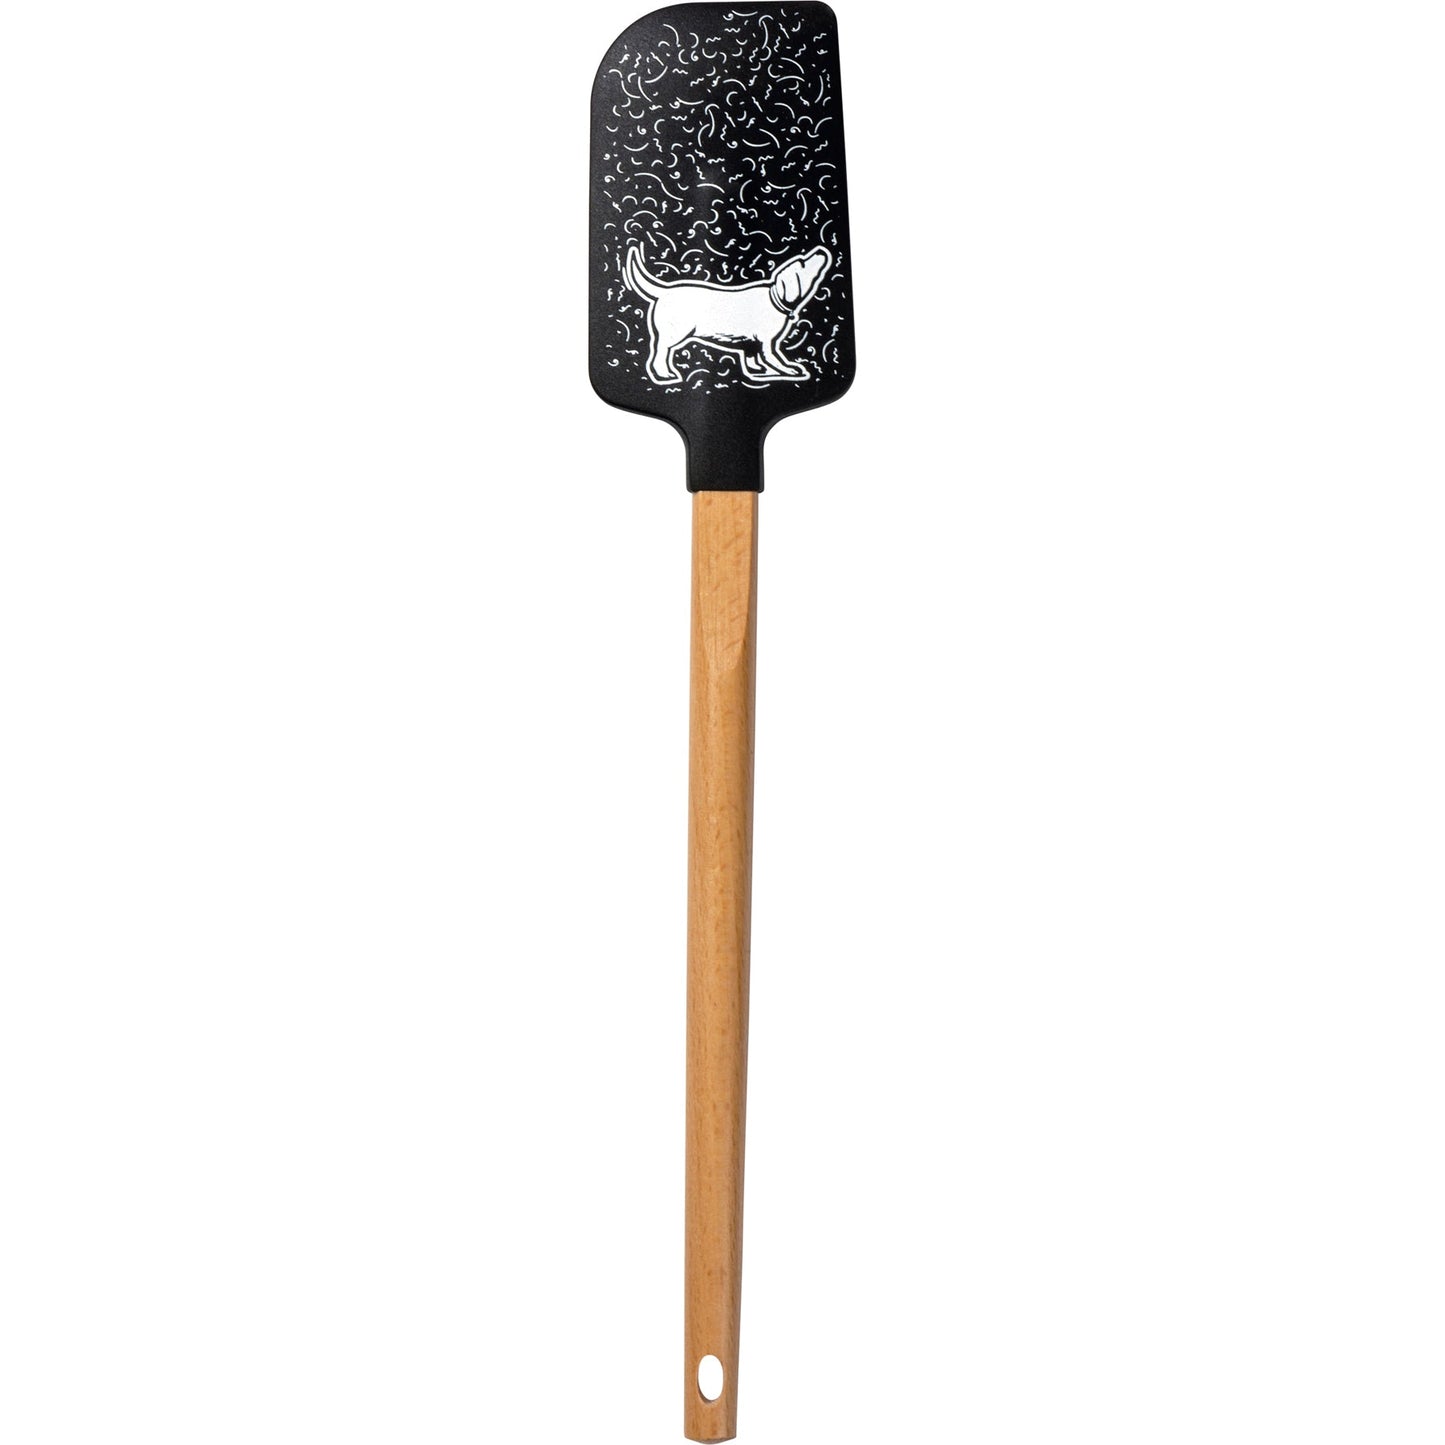 Dog Hair Is Part of The Recipe Spatula With A Wooden Handle